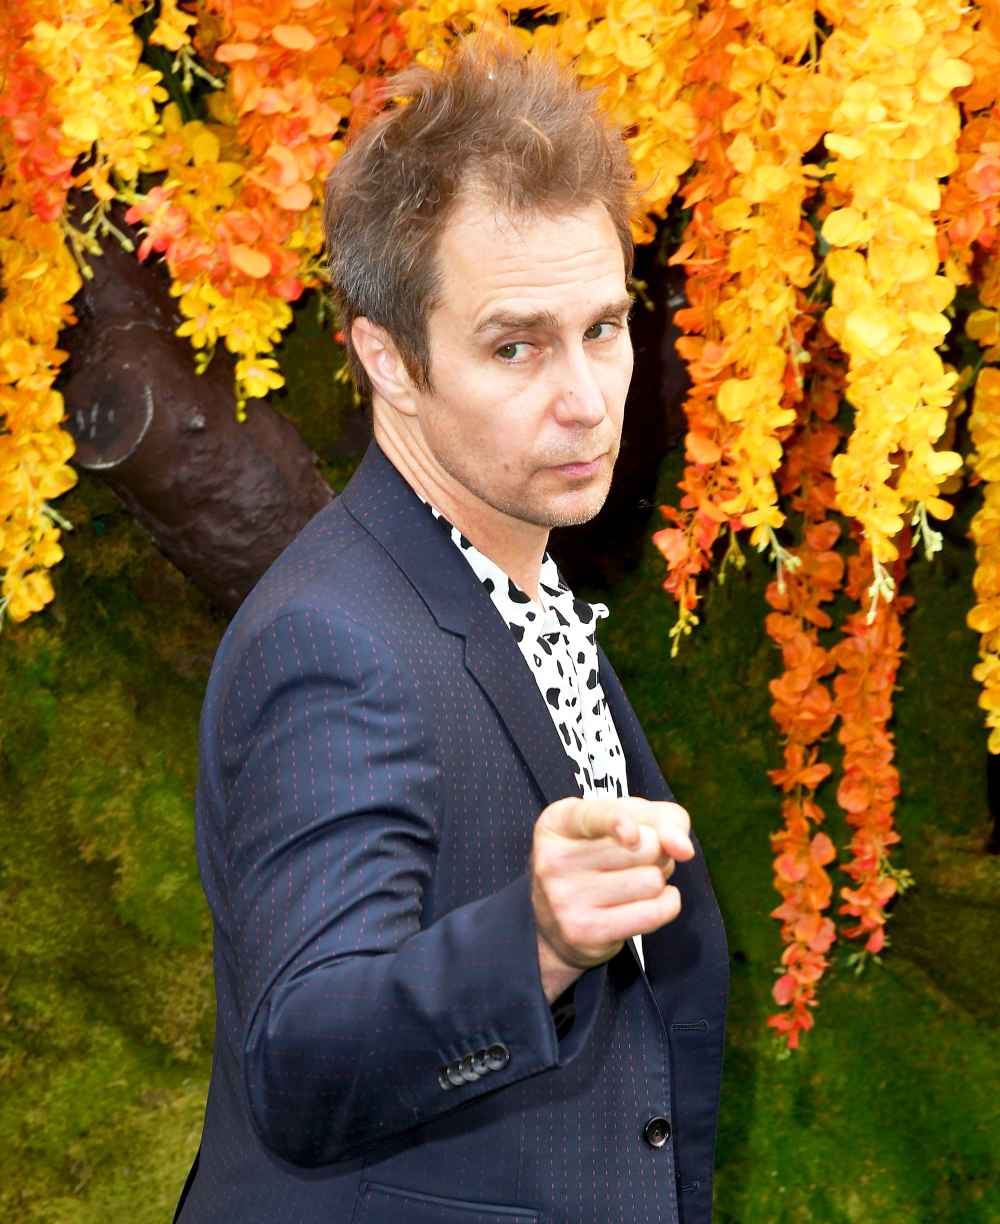 Sam Rockwell attends the 11th Annual Veuve Clicquot Polo Classic at Liberty State Park on June 2, 2018 in Jersey City, New Jersey.